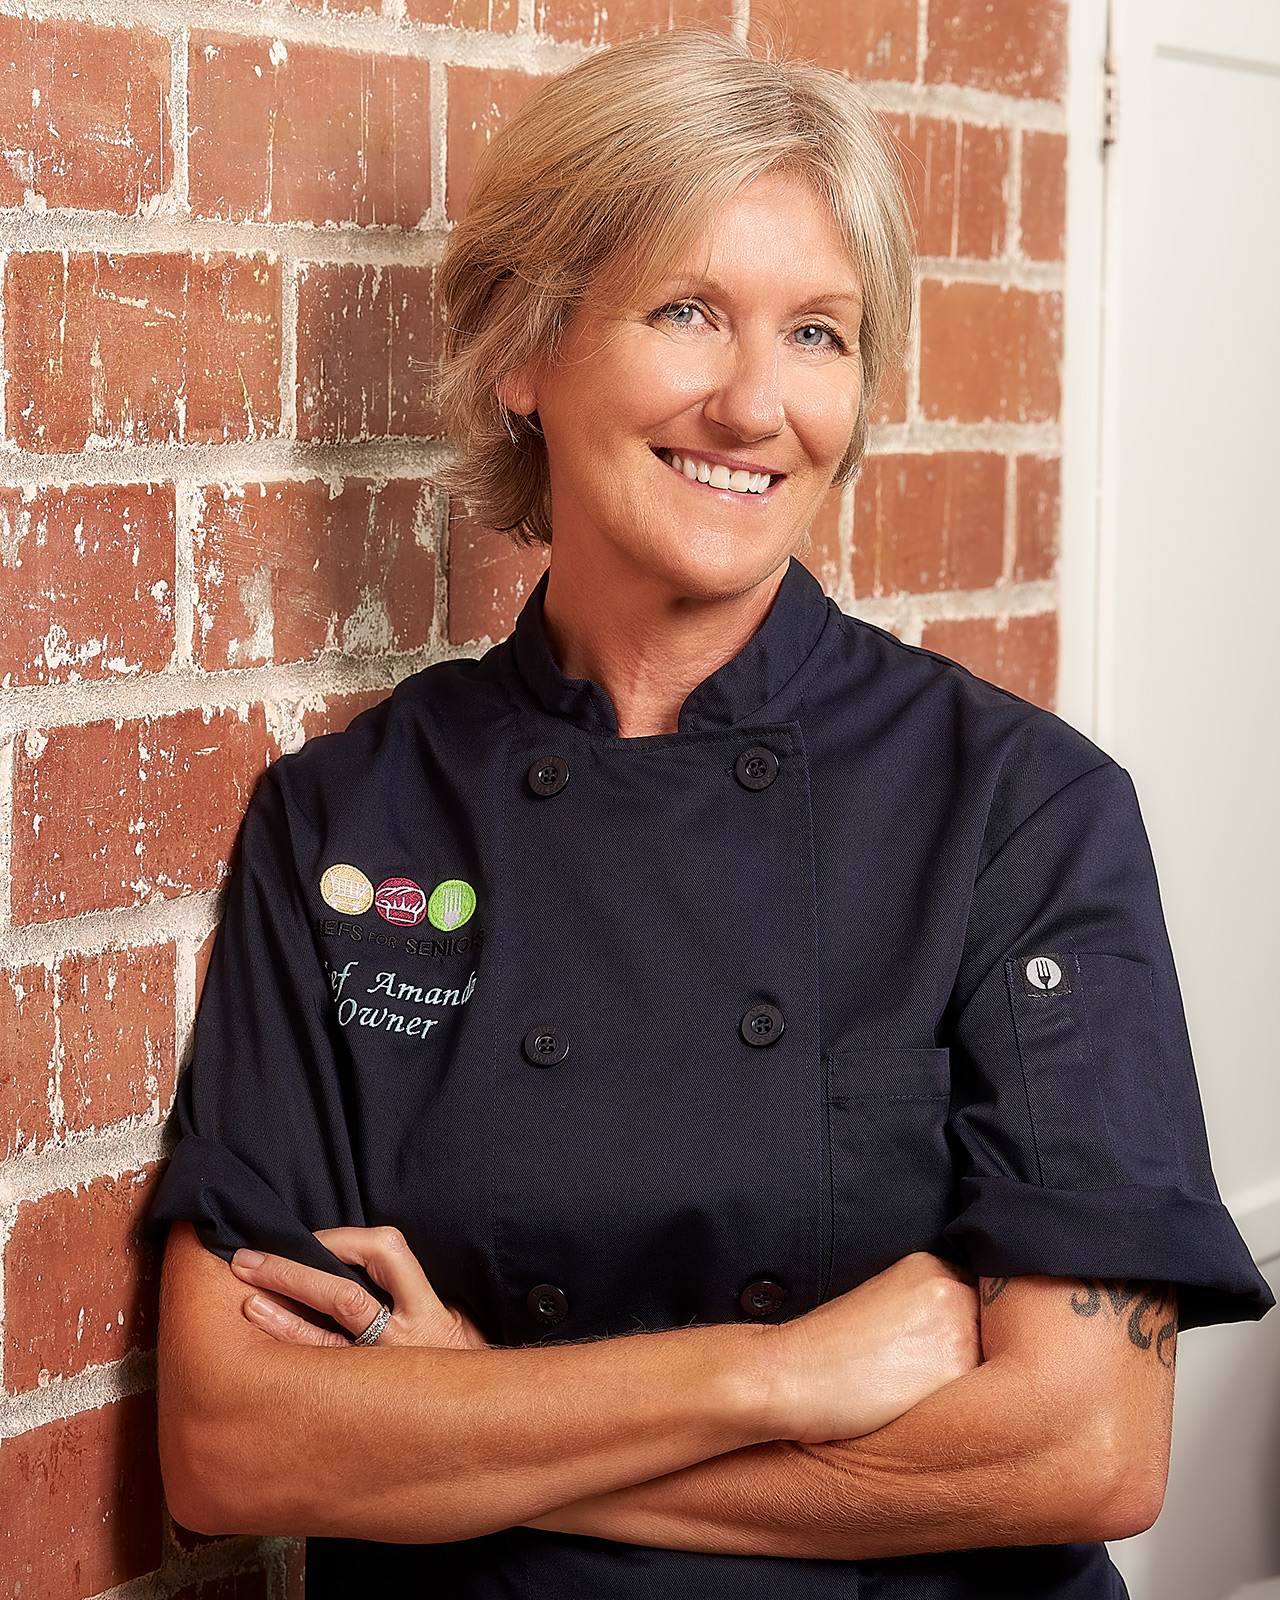 A woman chef in a headshot in Los Angeles made by The Light Committee